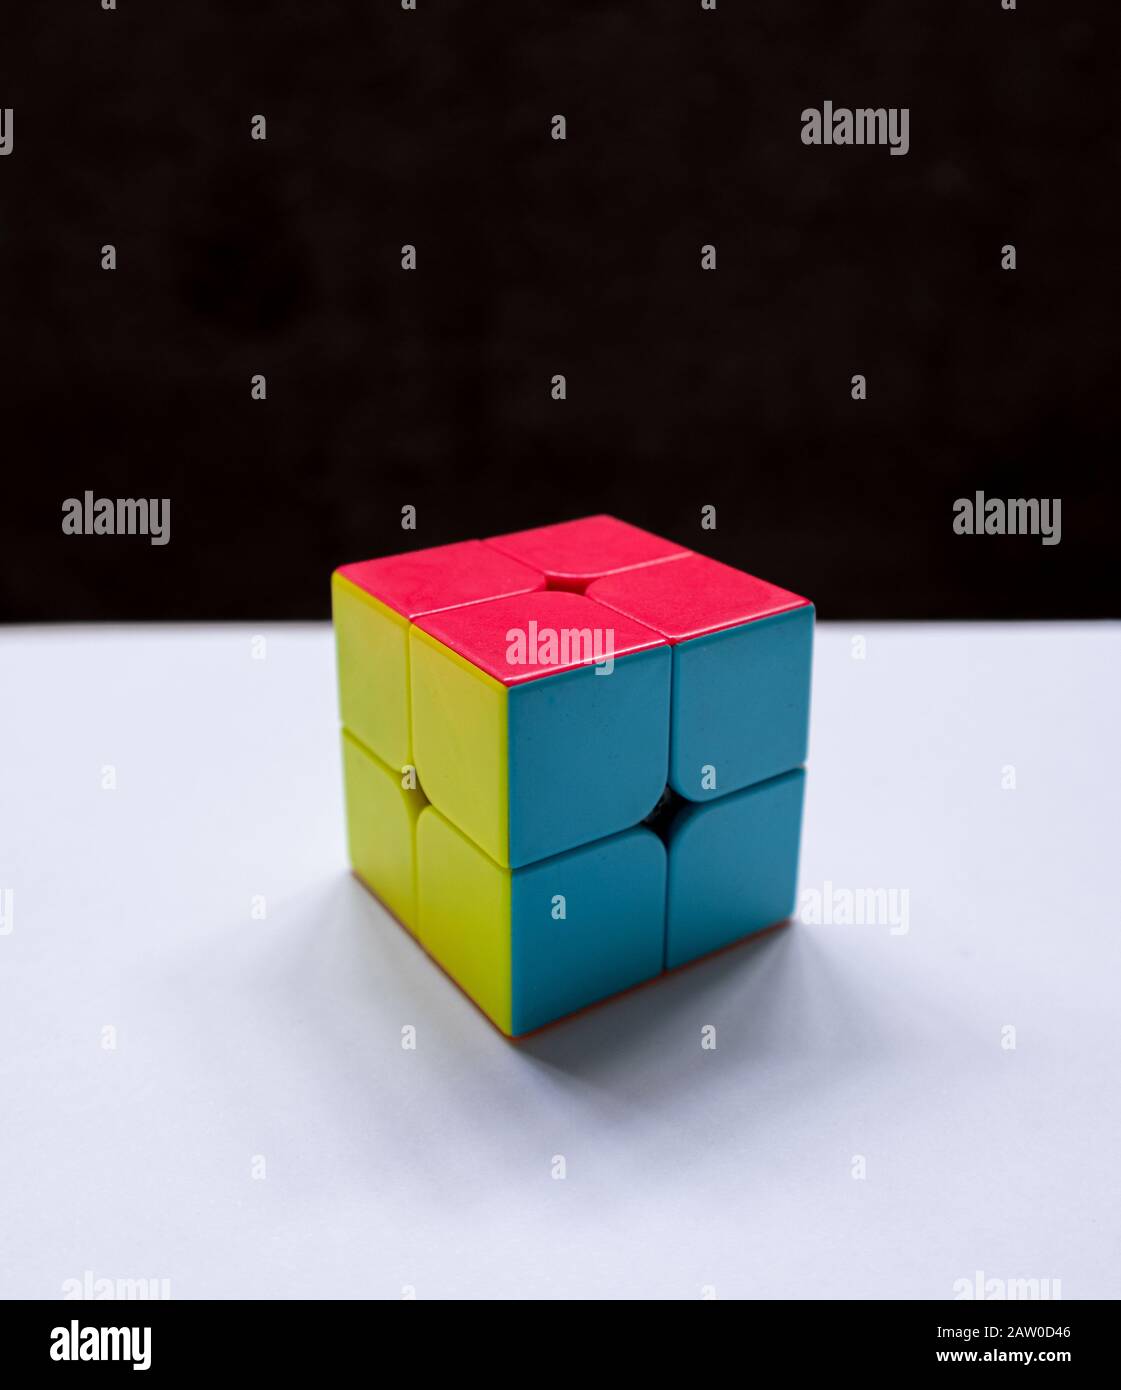 https://c8.alamy.com/comp/2AW0D46/picture-of-rubiks-cube-2x2-2AW0D46.jpg